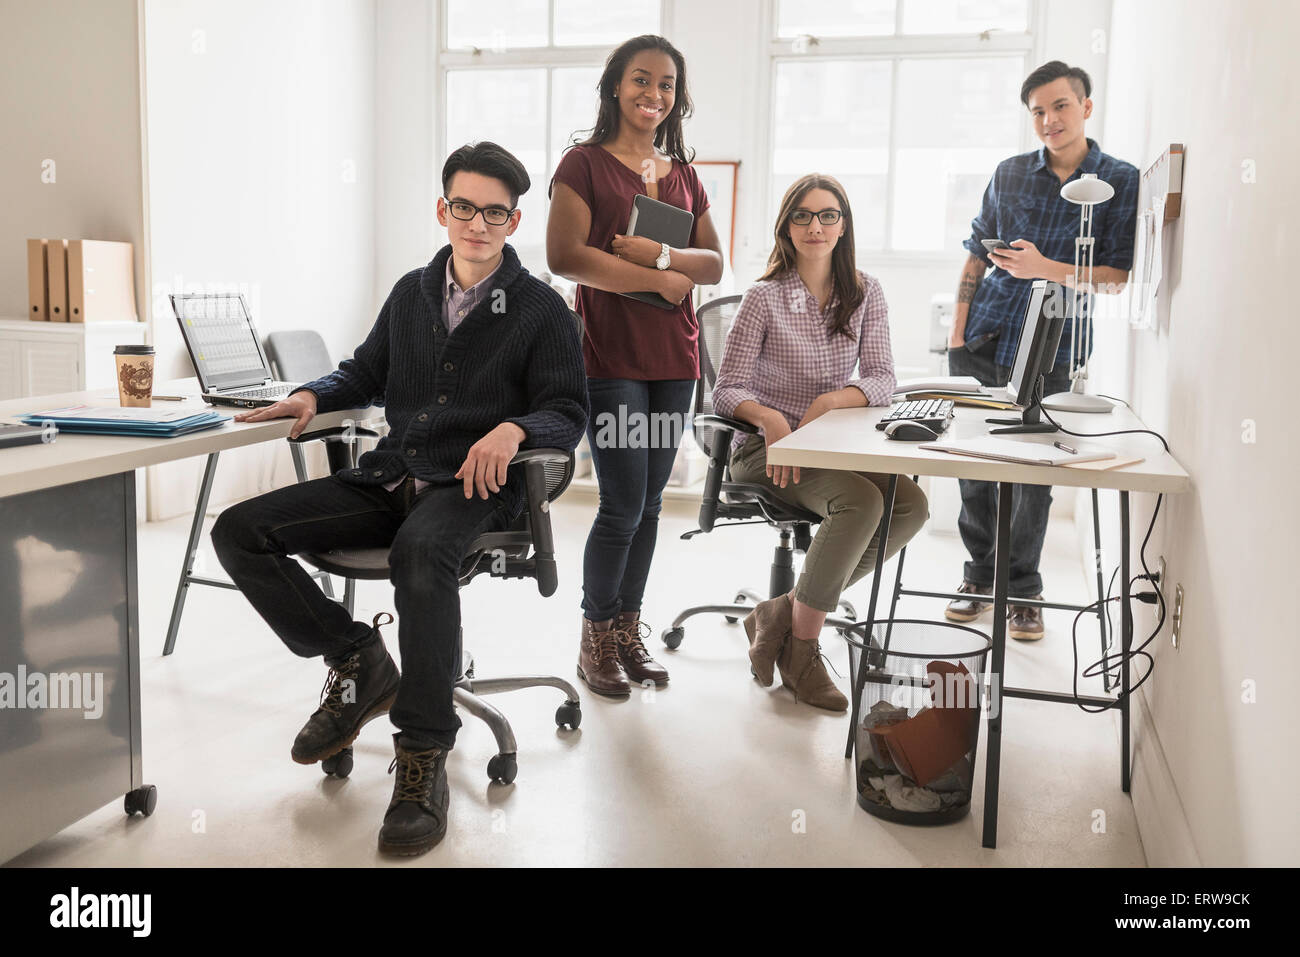 Business people smiling in office Stock Photo